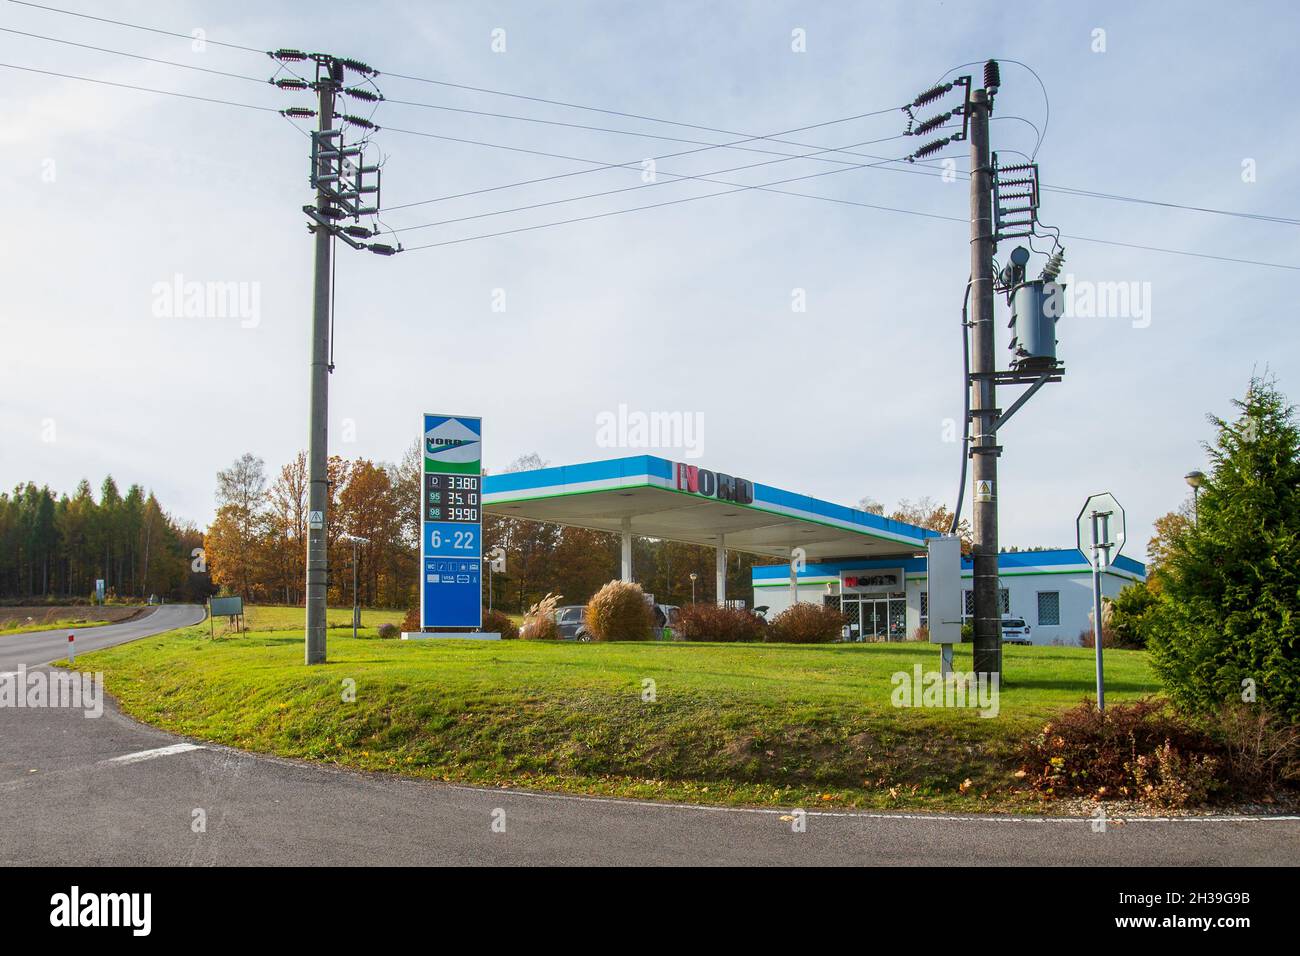 Vilemov, Czech Republic. 25th Oct, 2021. The NORD filling station in the Czech town of Vilemov near the border with Germany. Energy prices have been one of the most important topics throughout Europe for a few days now. Credit: Daniel Schäfer/dpa-Zentralbild/dpa/Alamy Live News Stock Photo